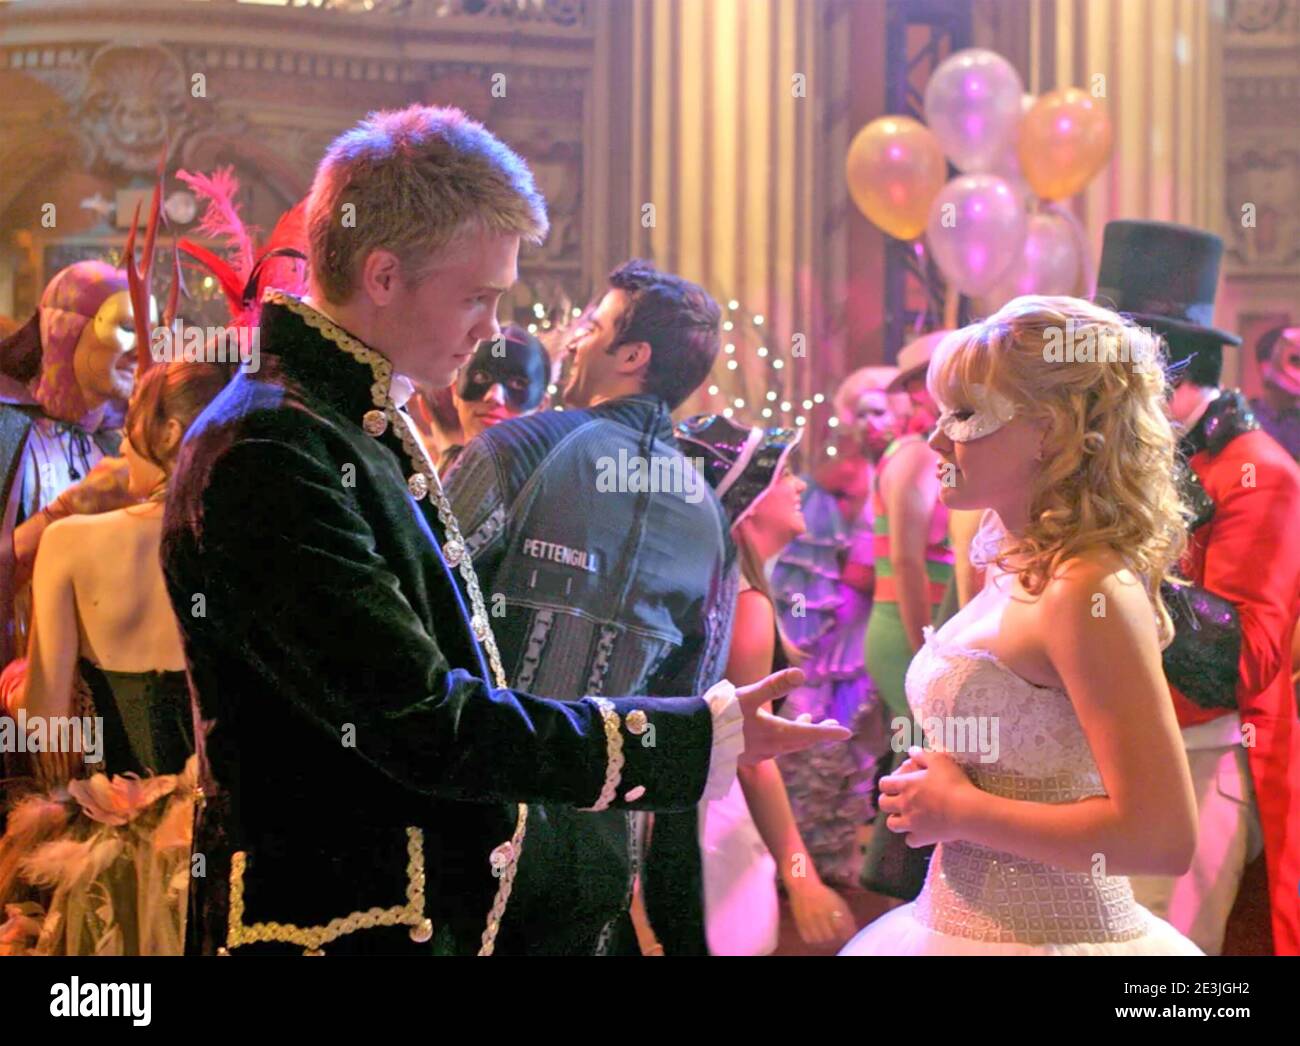 A CINDERELLA STORY 2004 Warner Bros. film with Hilary Duff and Chad Michael Murray Stock Photo